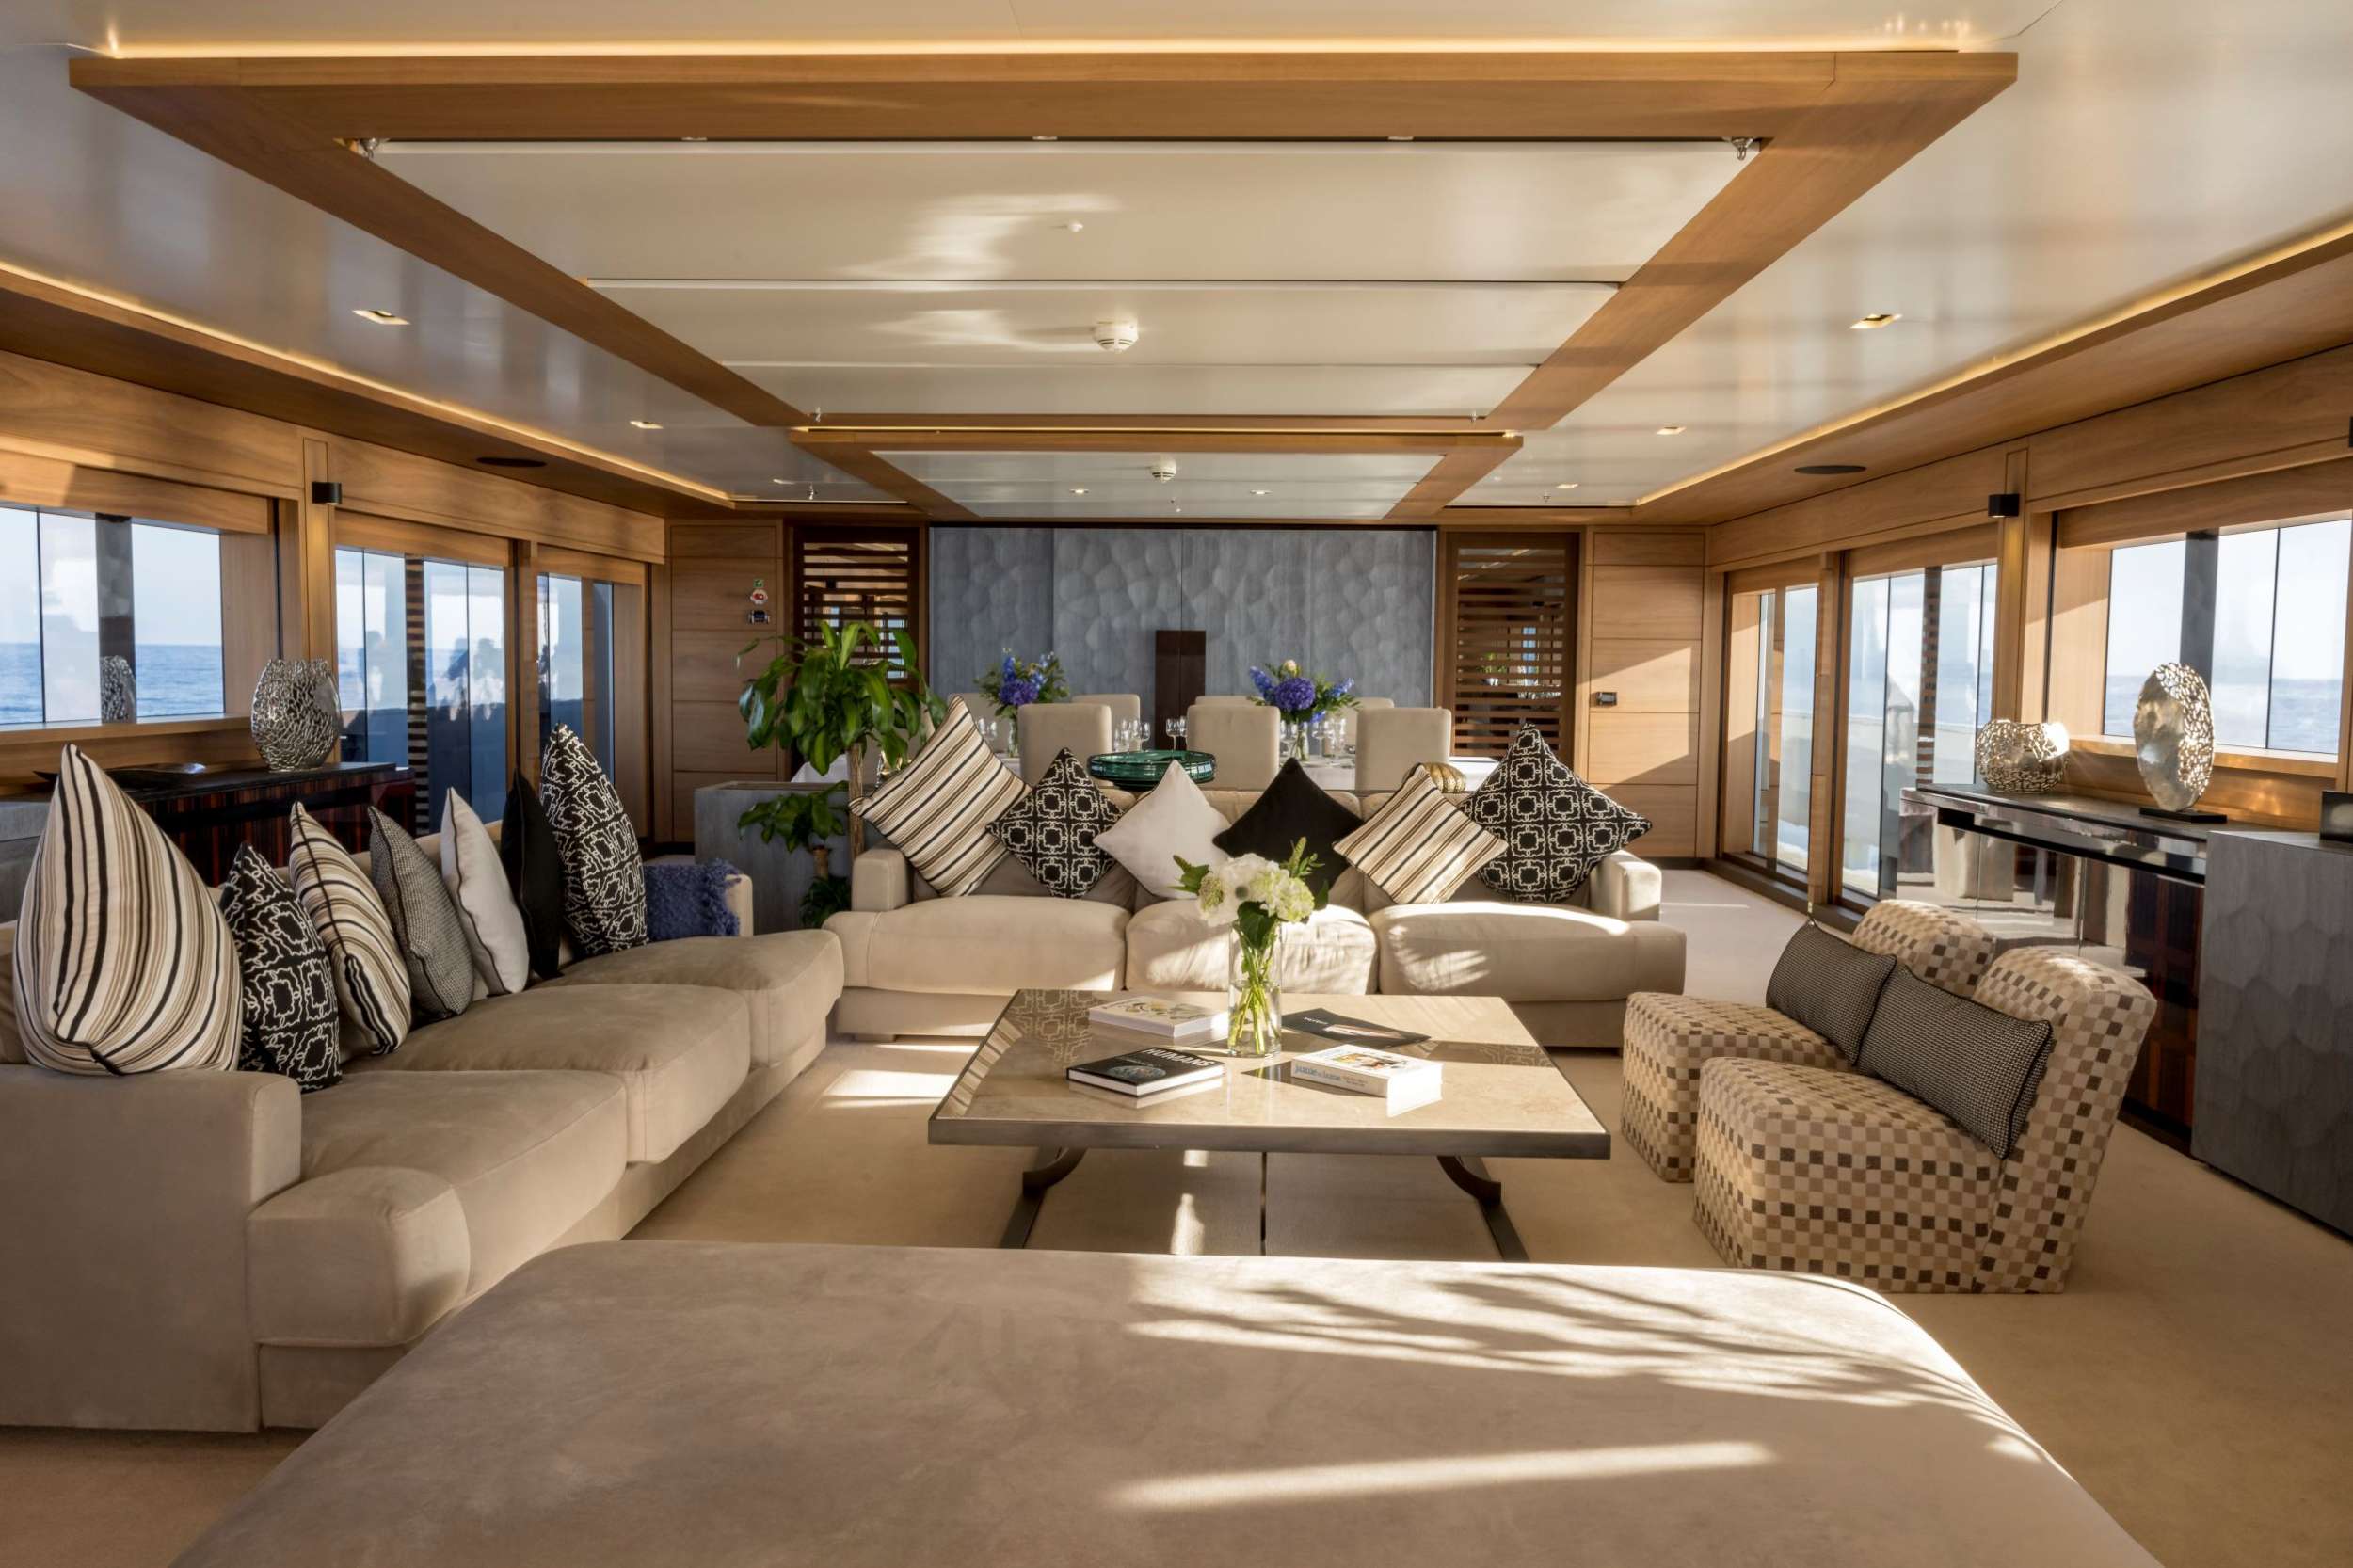 NAVIS ONE - Superyacht charter Thailand & Boat hire in Summer: W. Med -Naples/Sicily, Greece, W. Med -Riviera/Cors/Sard., Turkey, W. Med - Spain/Balearics, Croatia | Winter: Indian Ocean and SE Asia, Red Sea, United Arab Emirates 2